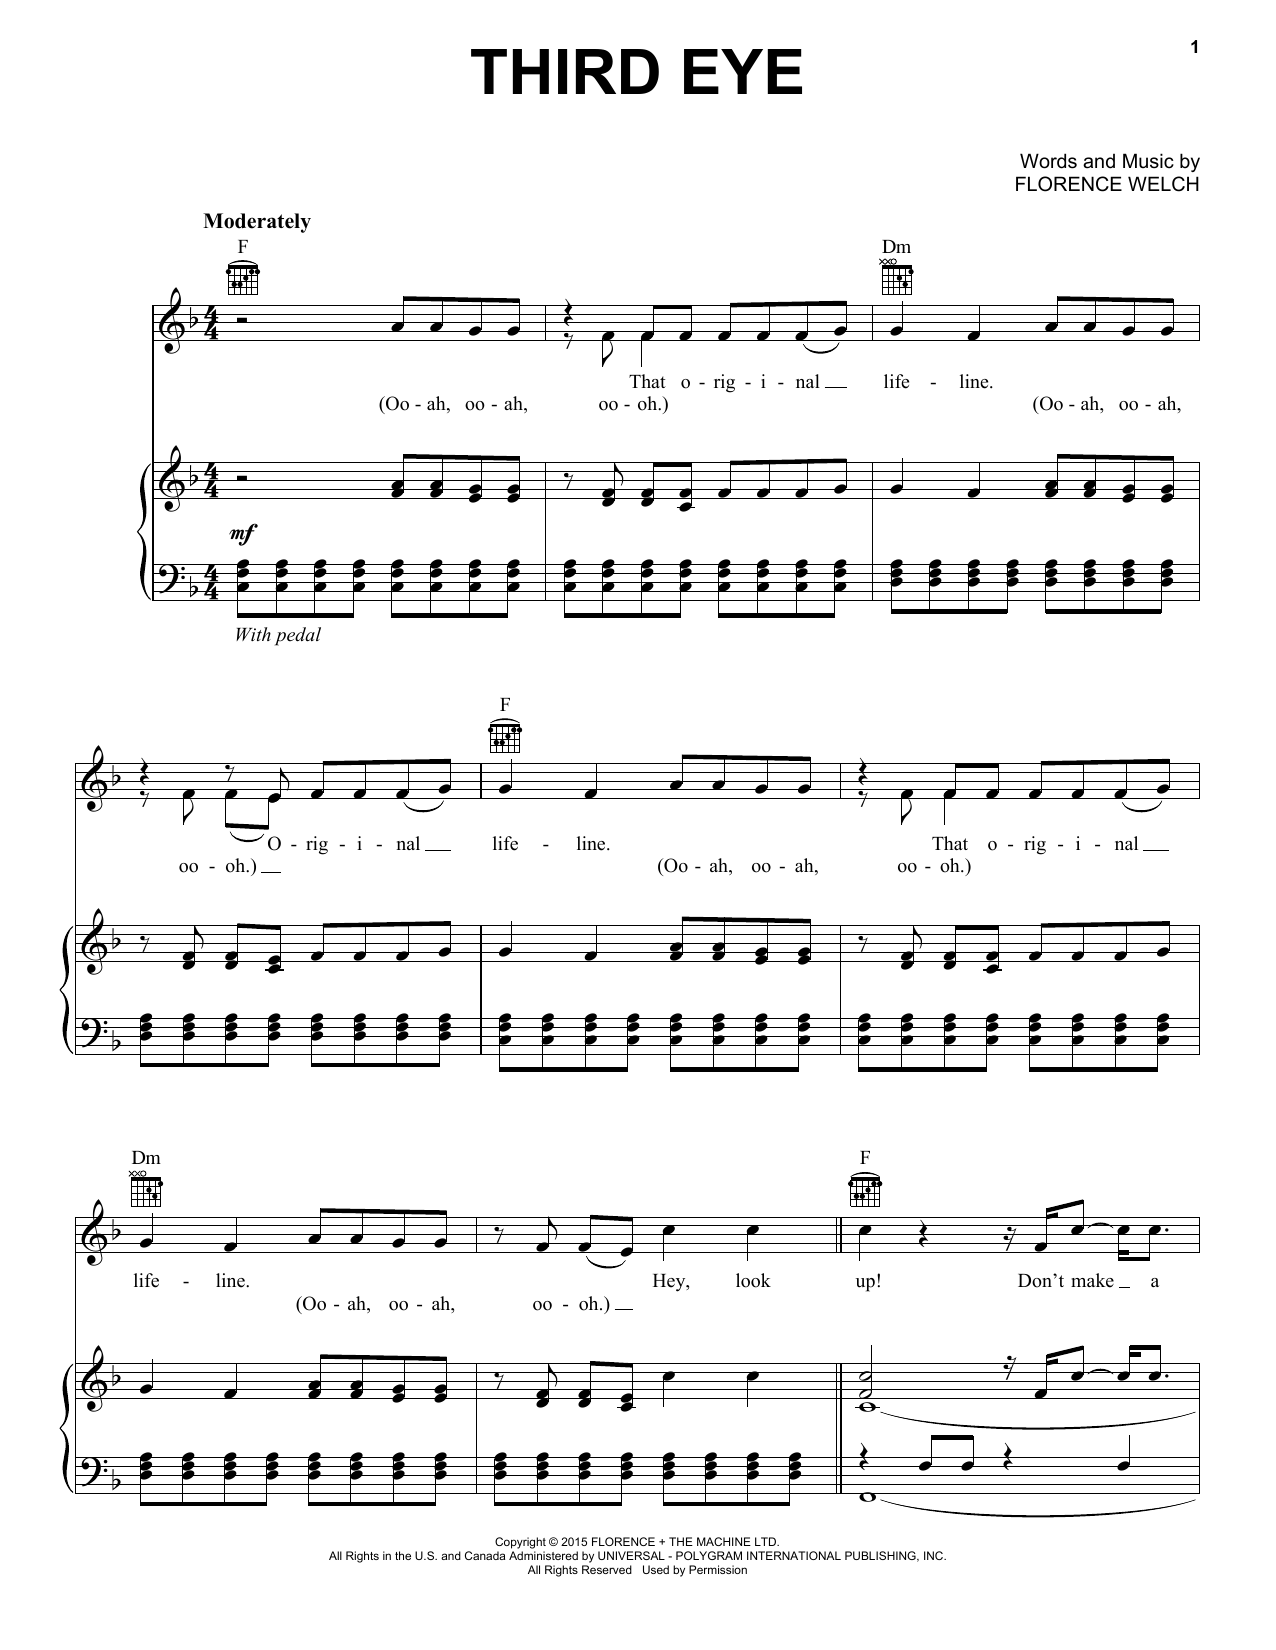 Download Florence And The Machine Third Eye Sheet Music